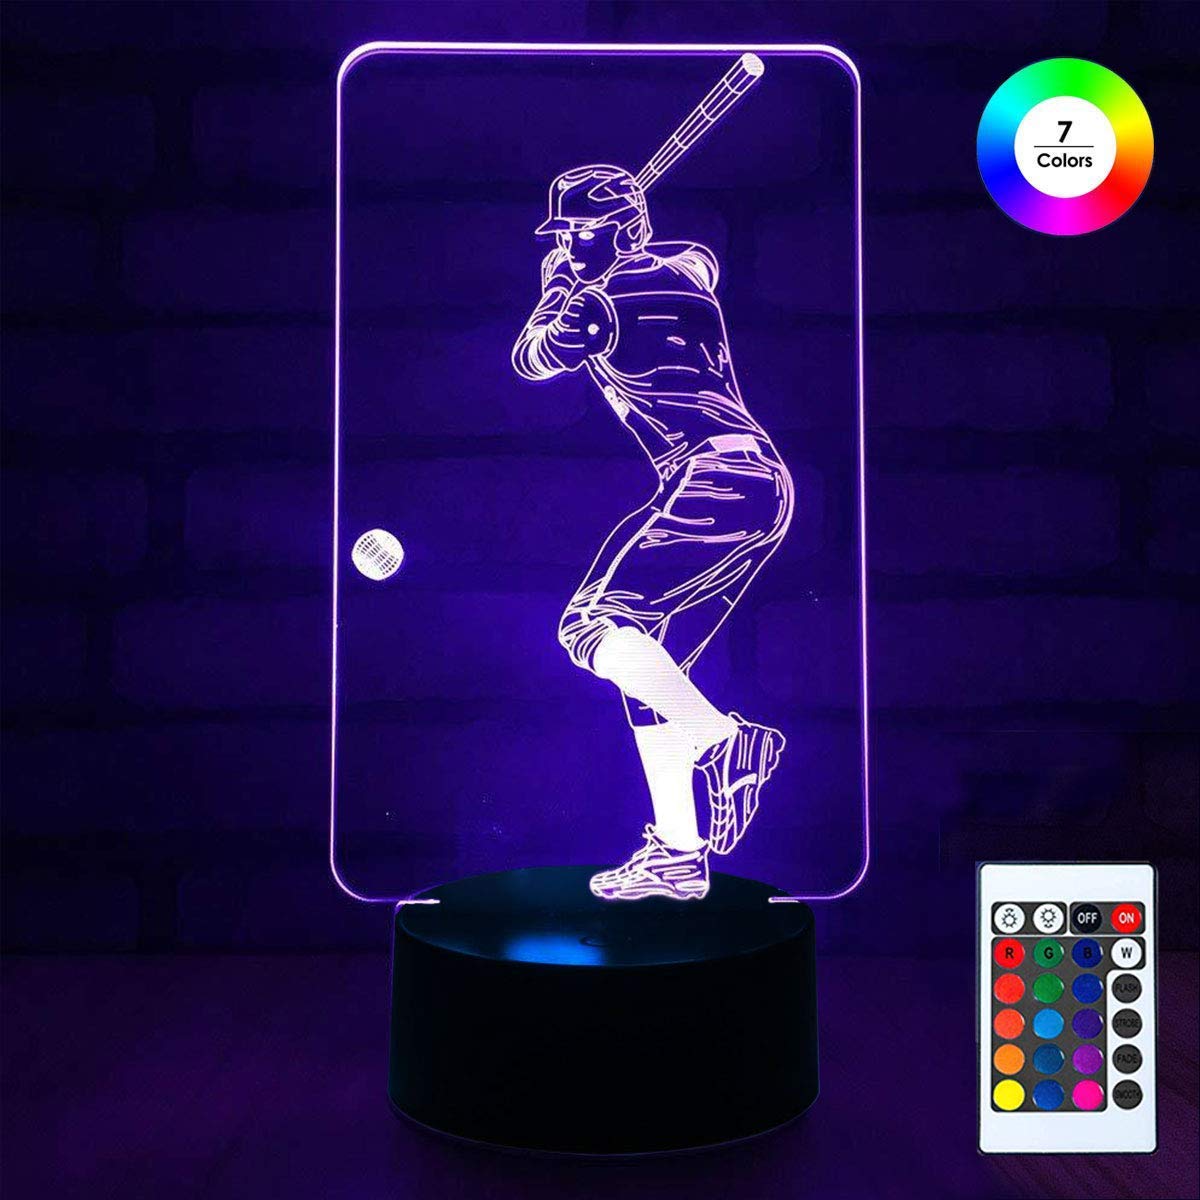 3D Remote Night Stand Light, EpicGadget Touch Control Optical Illusion Visualization LED Night Light Lamp 7 Colors Changing Remote Control Night Light Lamp Stand (Baseball Player) - image 1 of 3